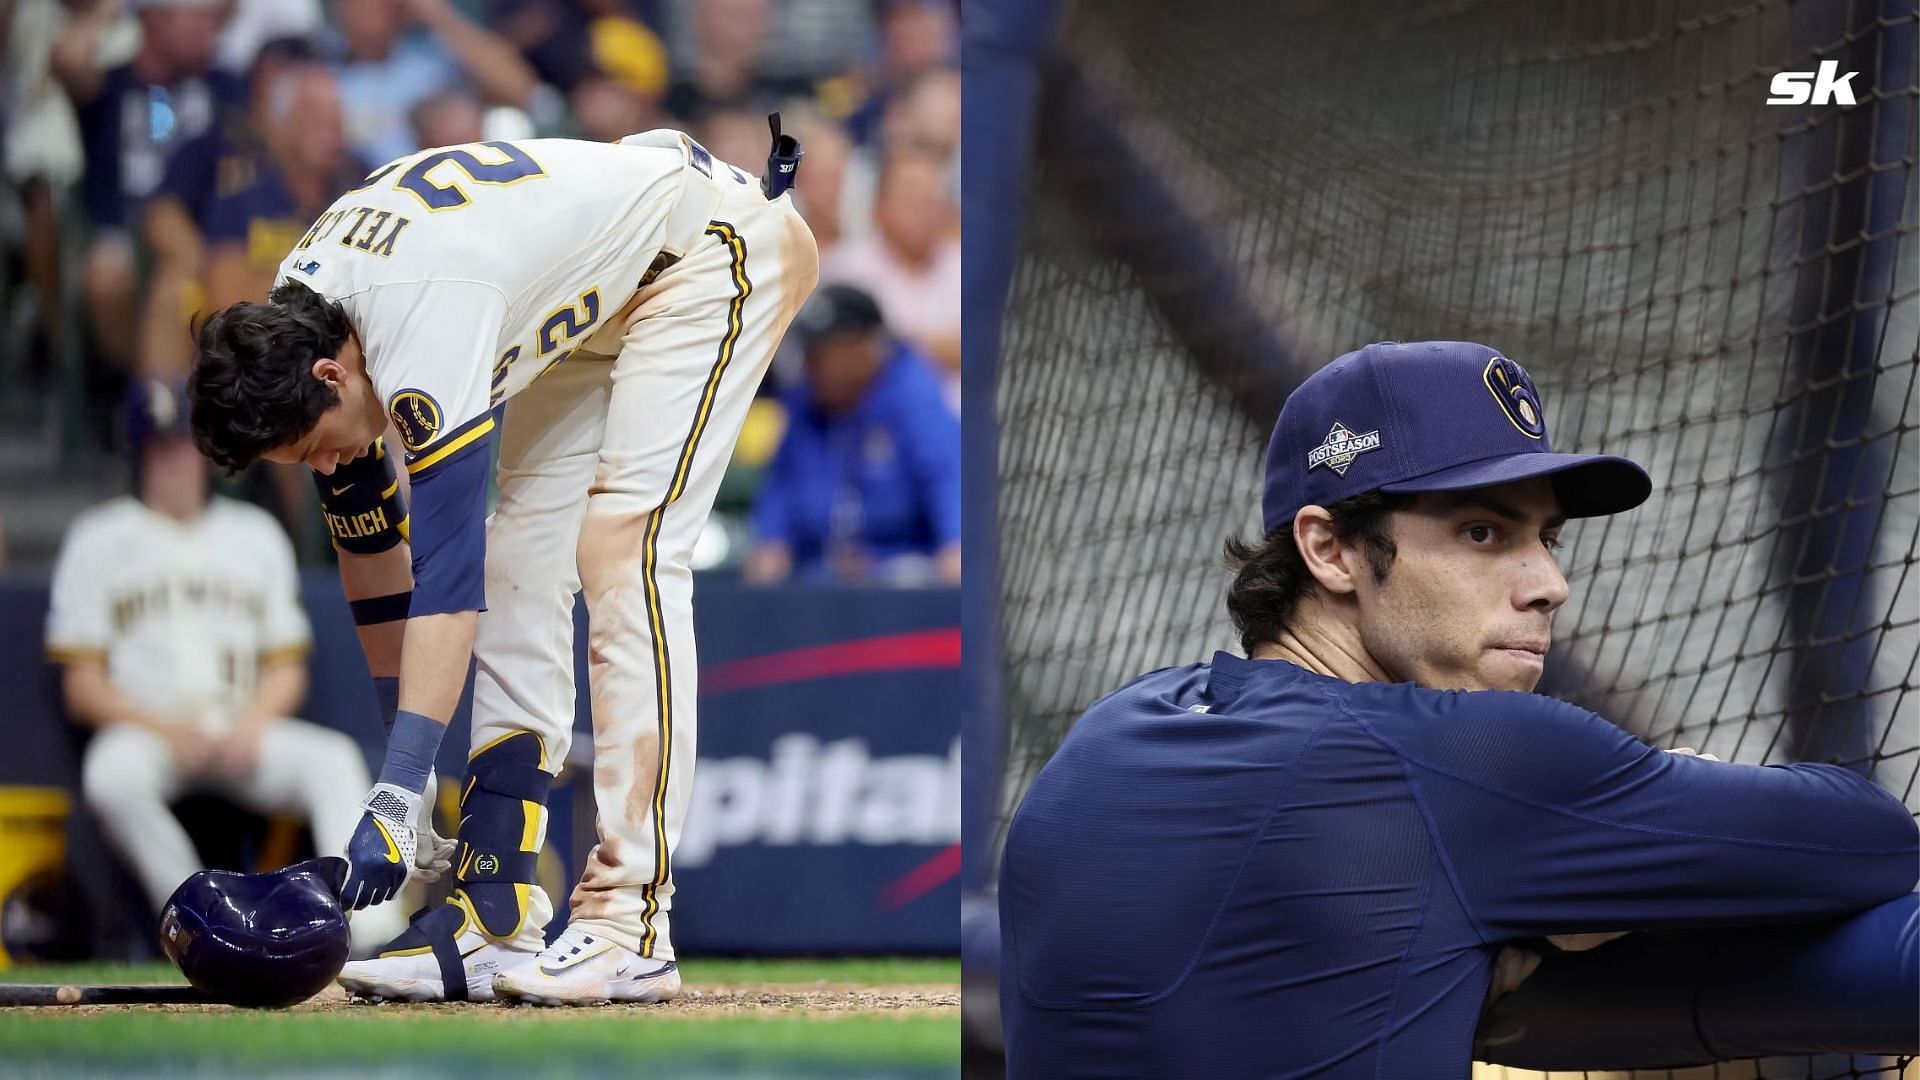 Christian Yelich Injury: Brewers place former MVP on 10-day IL with lower back strain